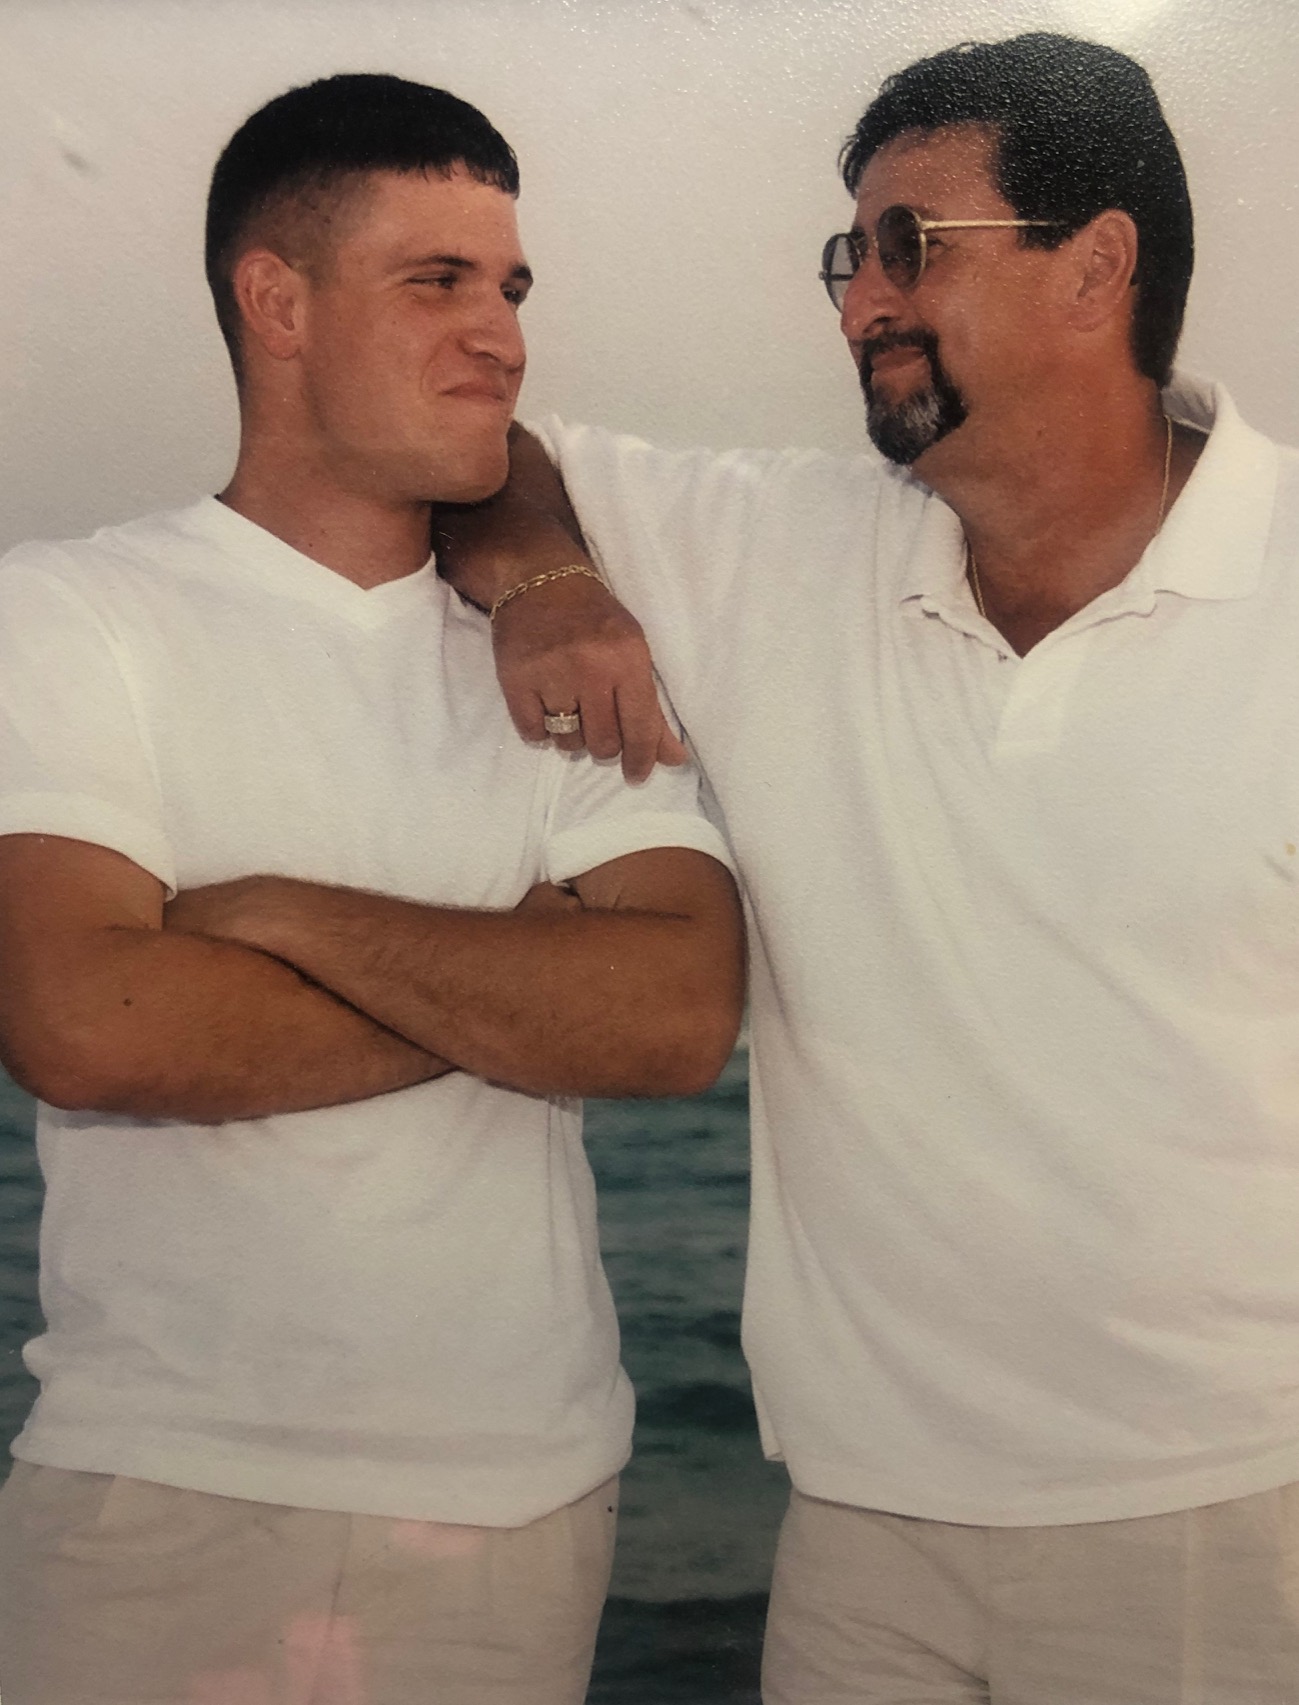 J.R. Spears & his father, Tim